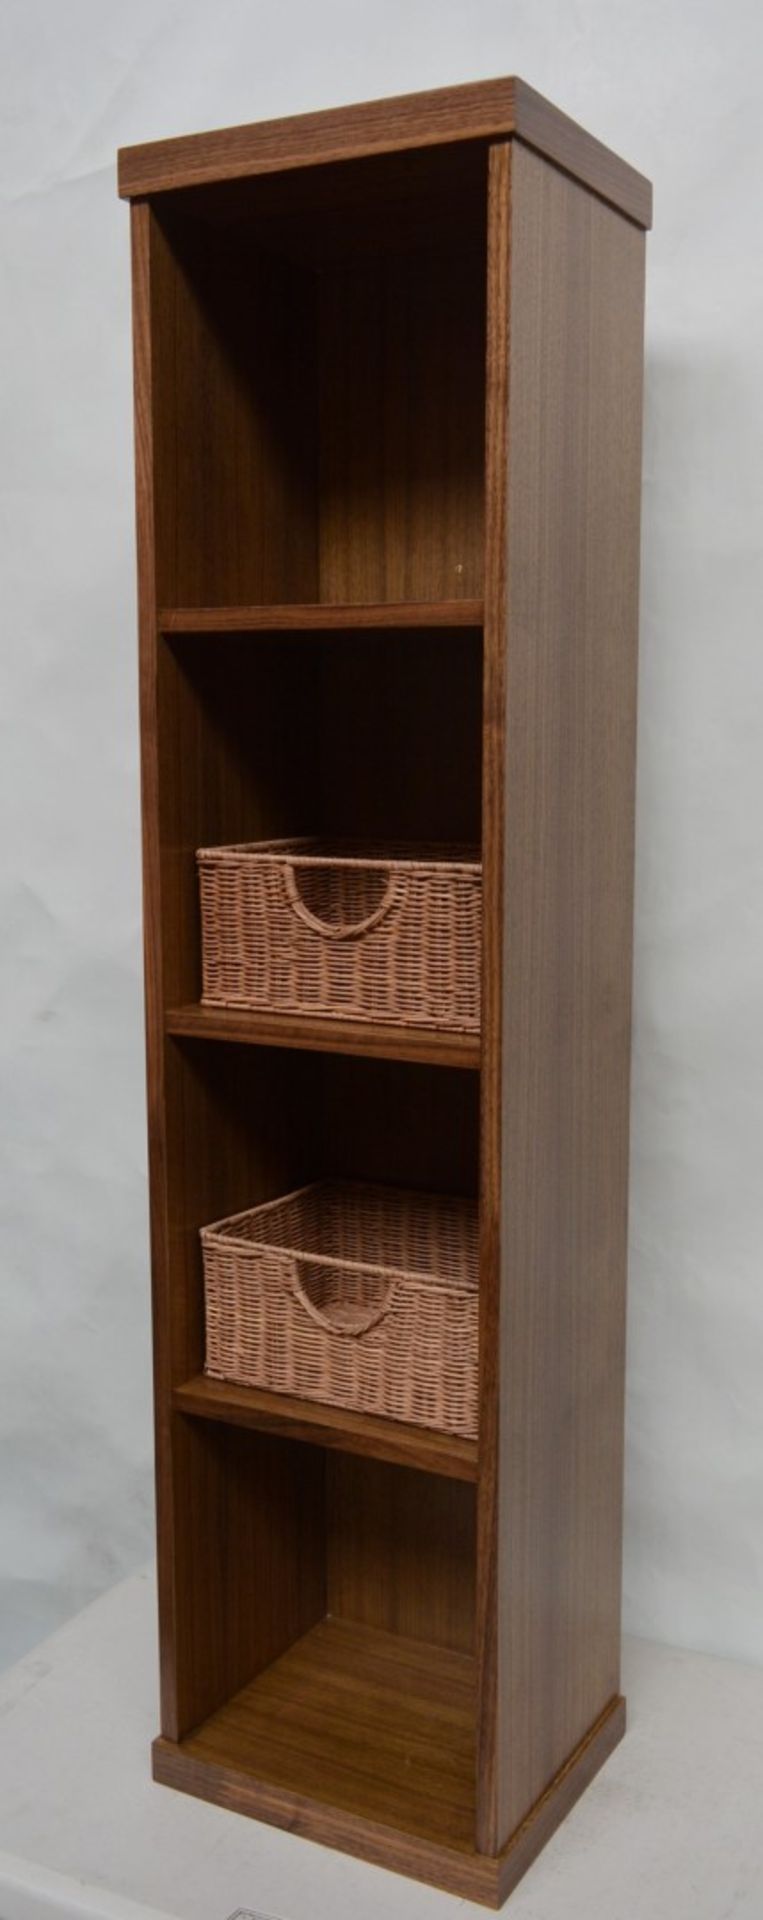 1 x Vogue ARC Series 2 Bathroom Storage Shelving Unit - Wall Mounted or Floor Standing - WALNUT - Image 4 of 9